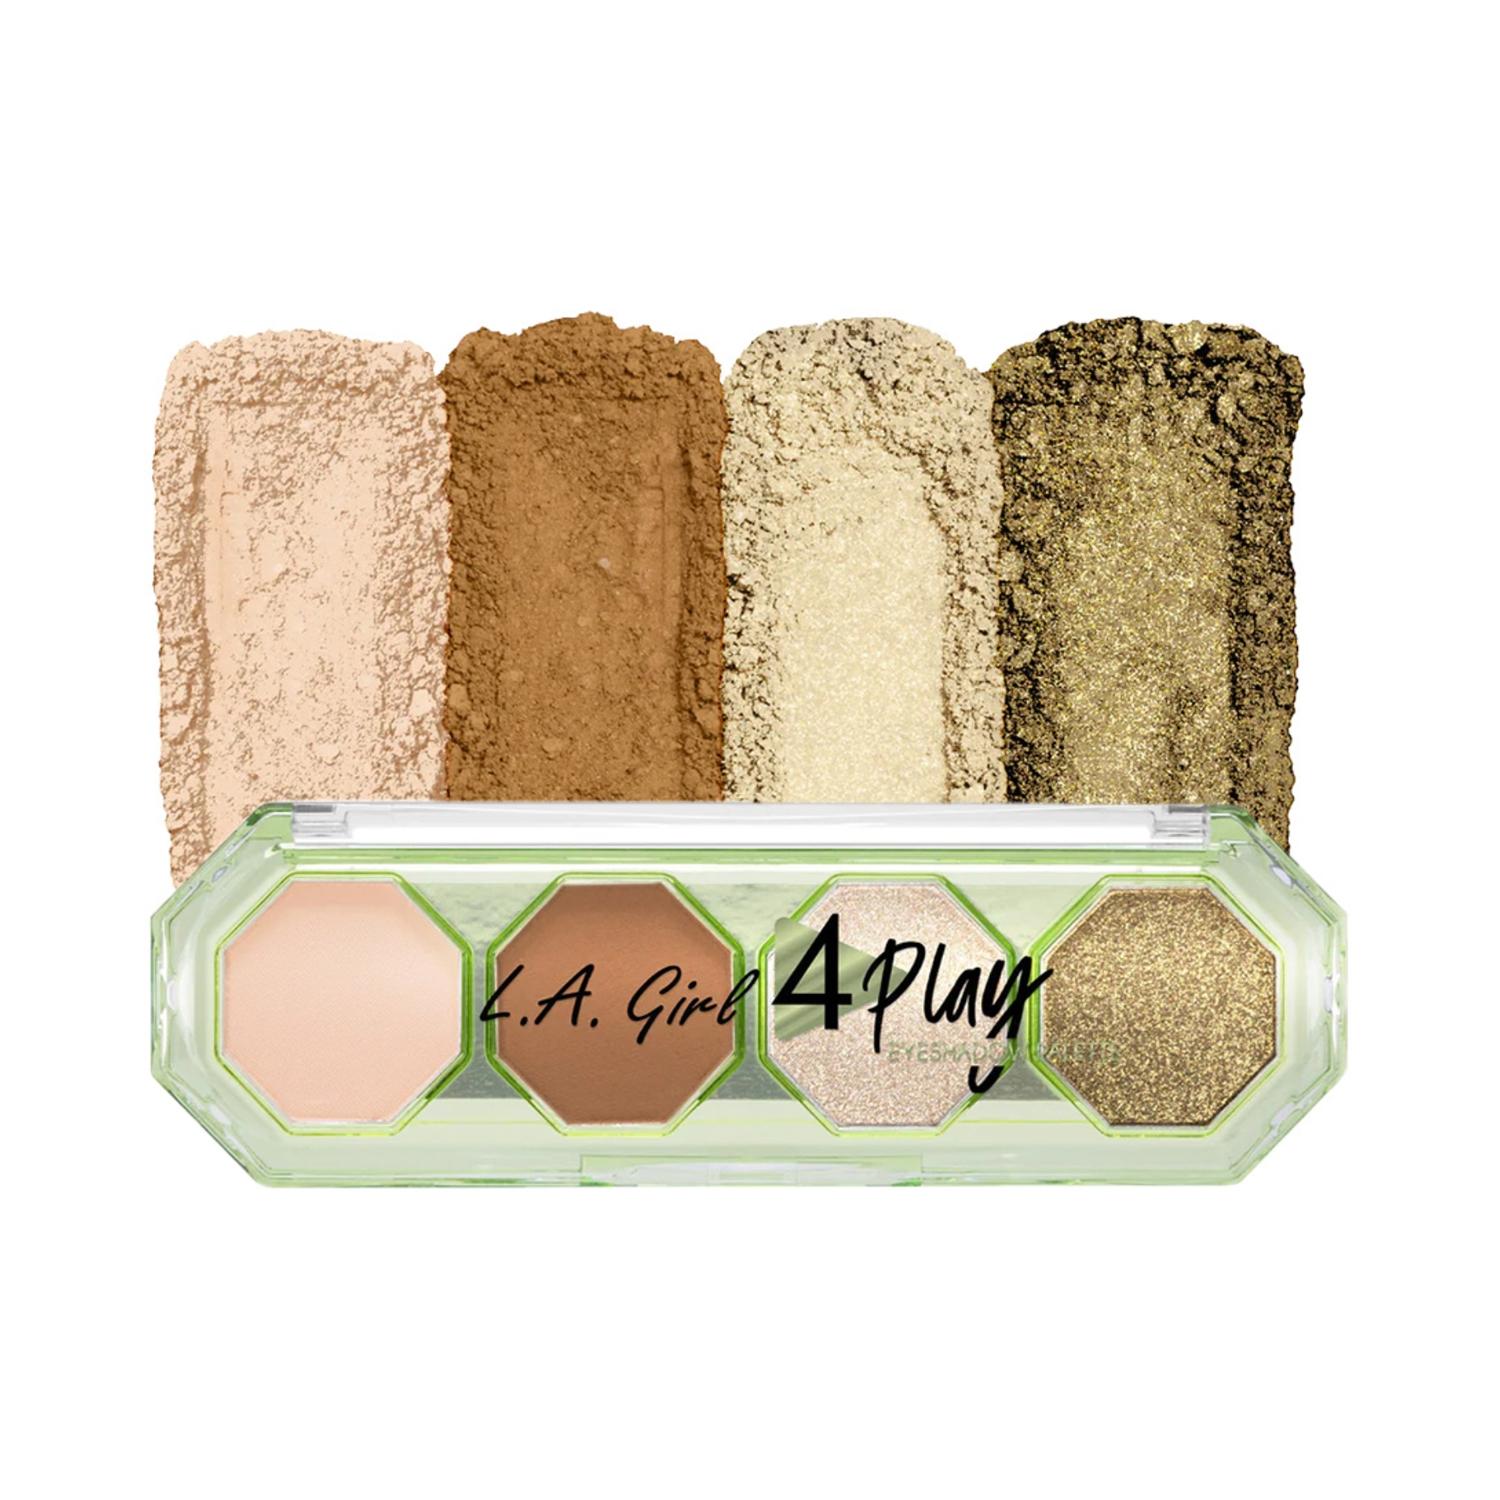 l.a. girl 4 play eyeshadow palette - ges233 cowgirl (3.2g)